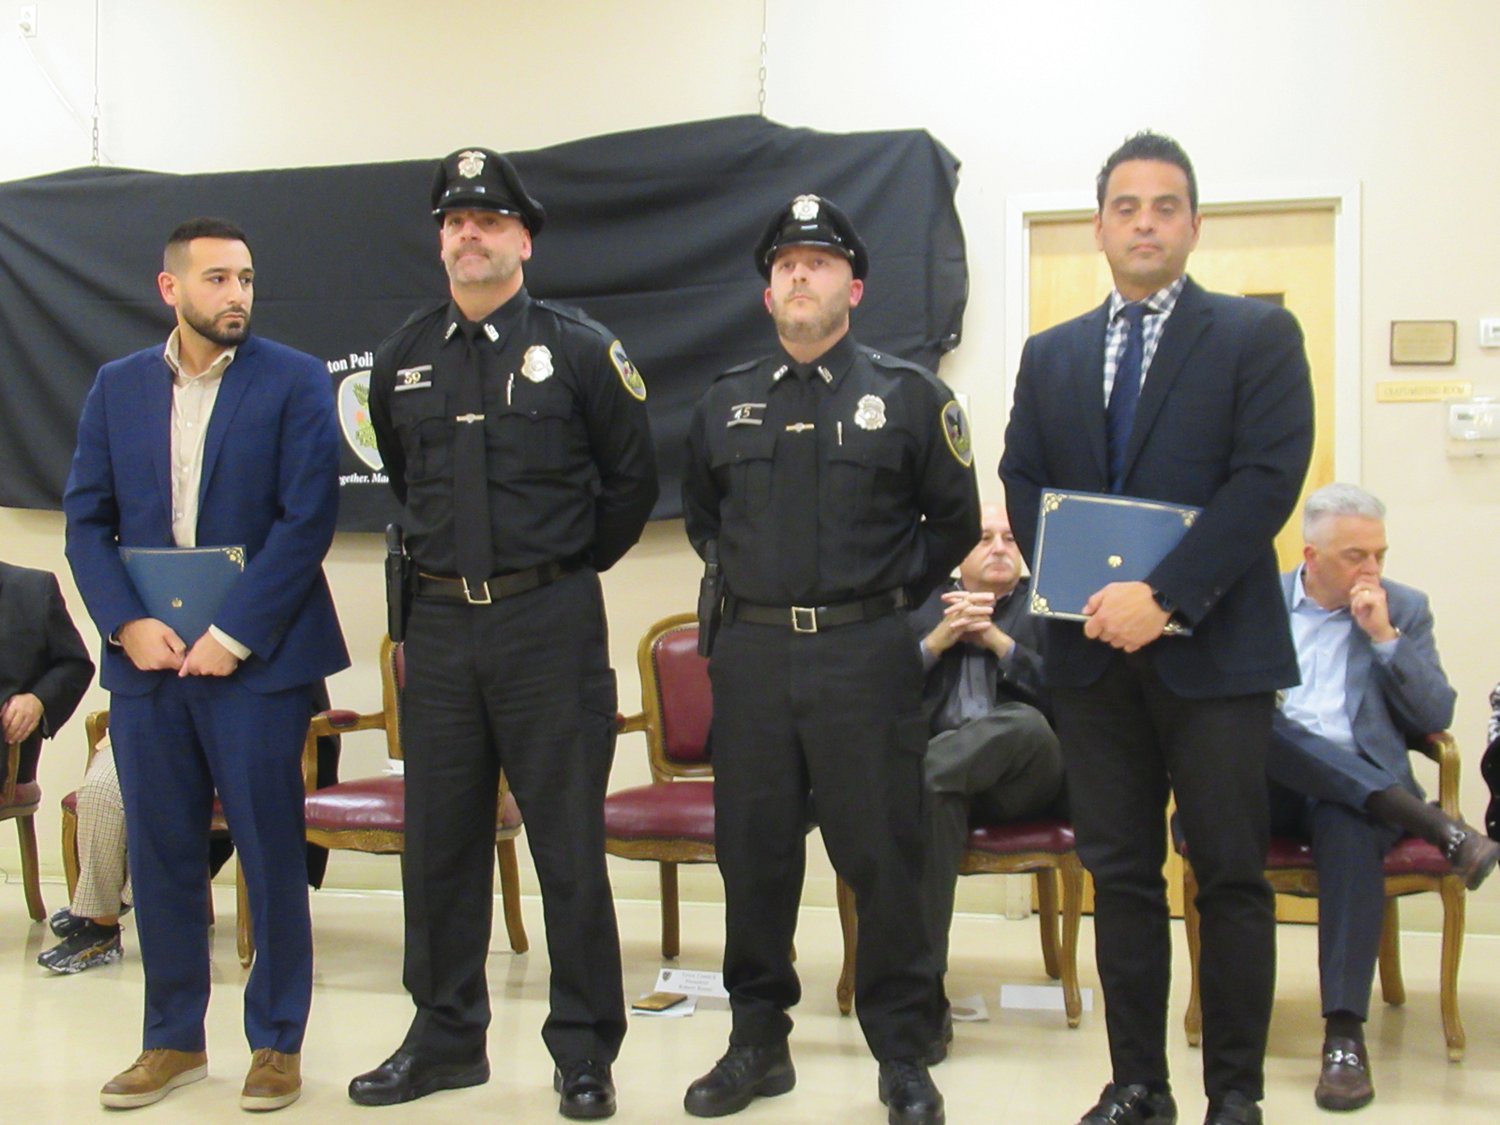 COUNCIL CORNER: Among the JPD officers who received a Town Council Award during the recent Recognition of Excellence Ceremony were Patrolman Joseph Rotella and Mike Protano. Town Council Vice President Joseph Polisena Jr. and President Robert Russo did the honors.